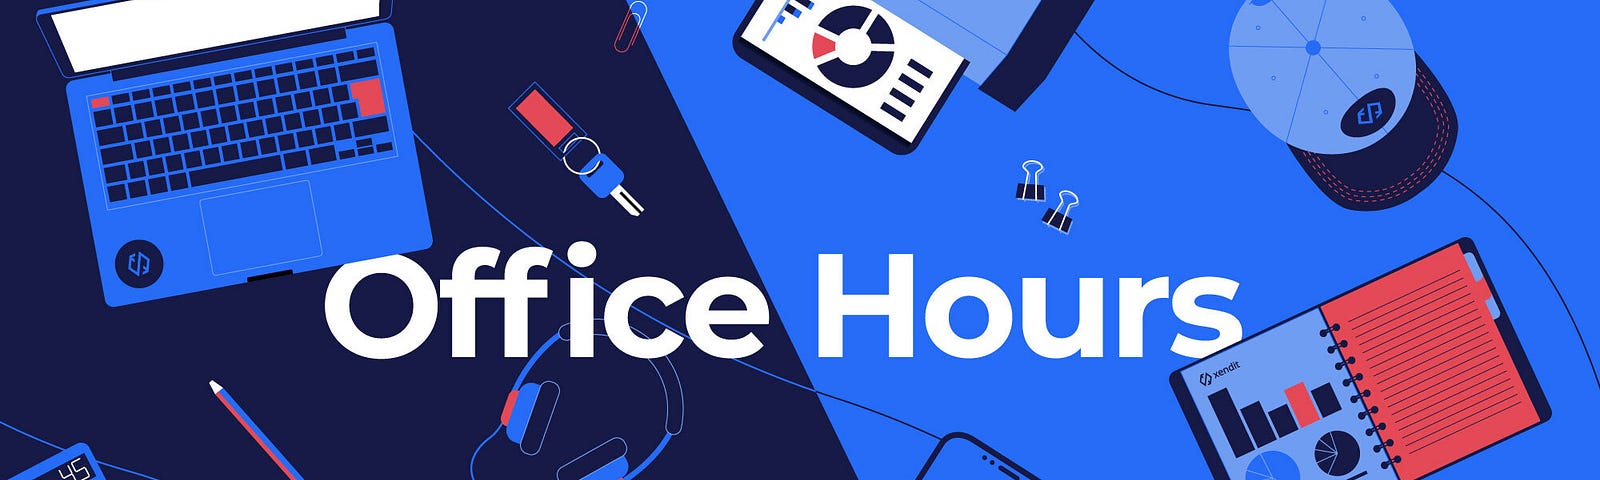 Office Hours Banner